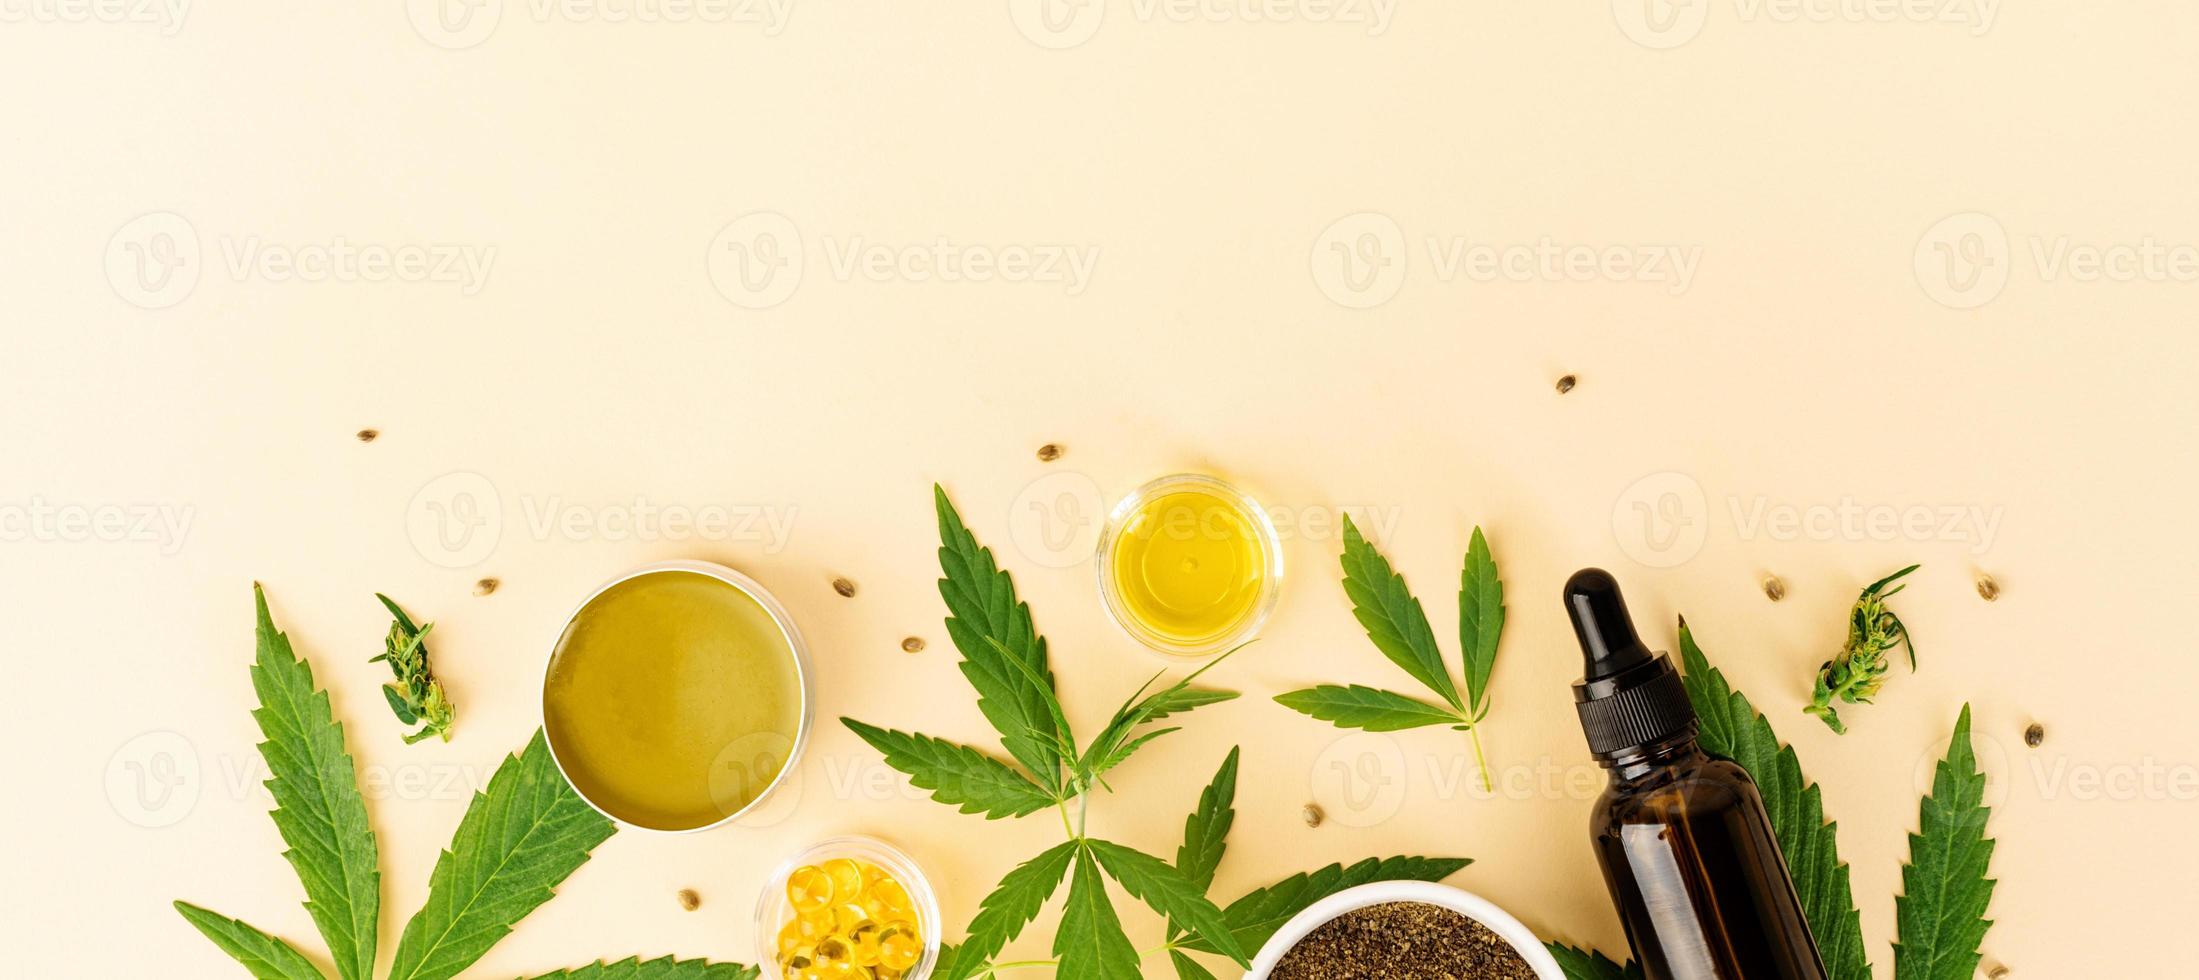 Cbd oil and cannabis leaves cosmetics top view on orange background photo